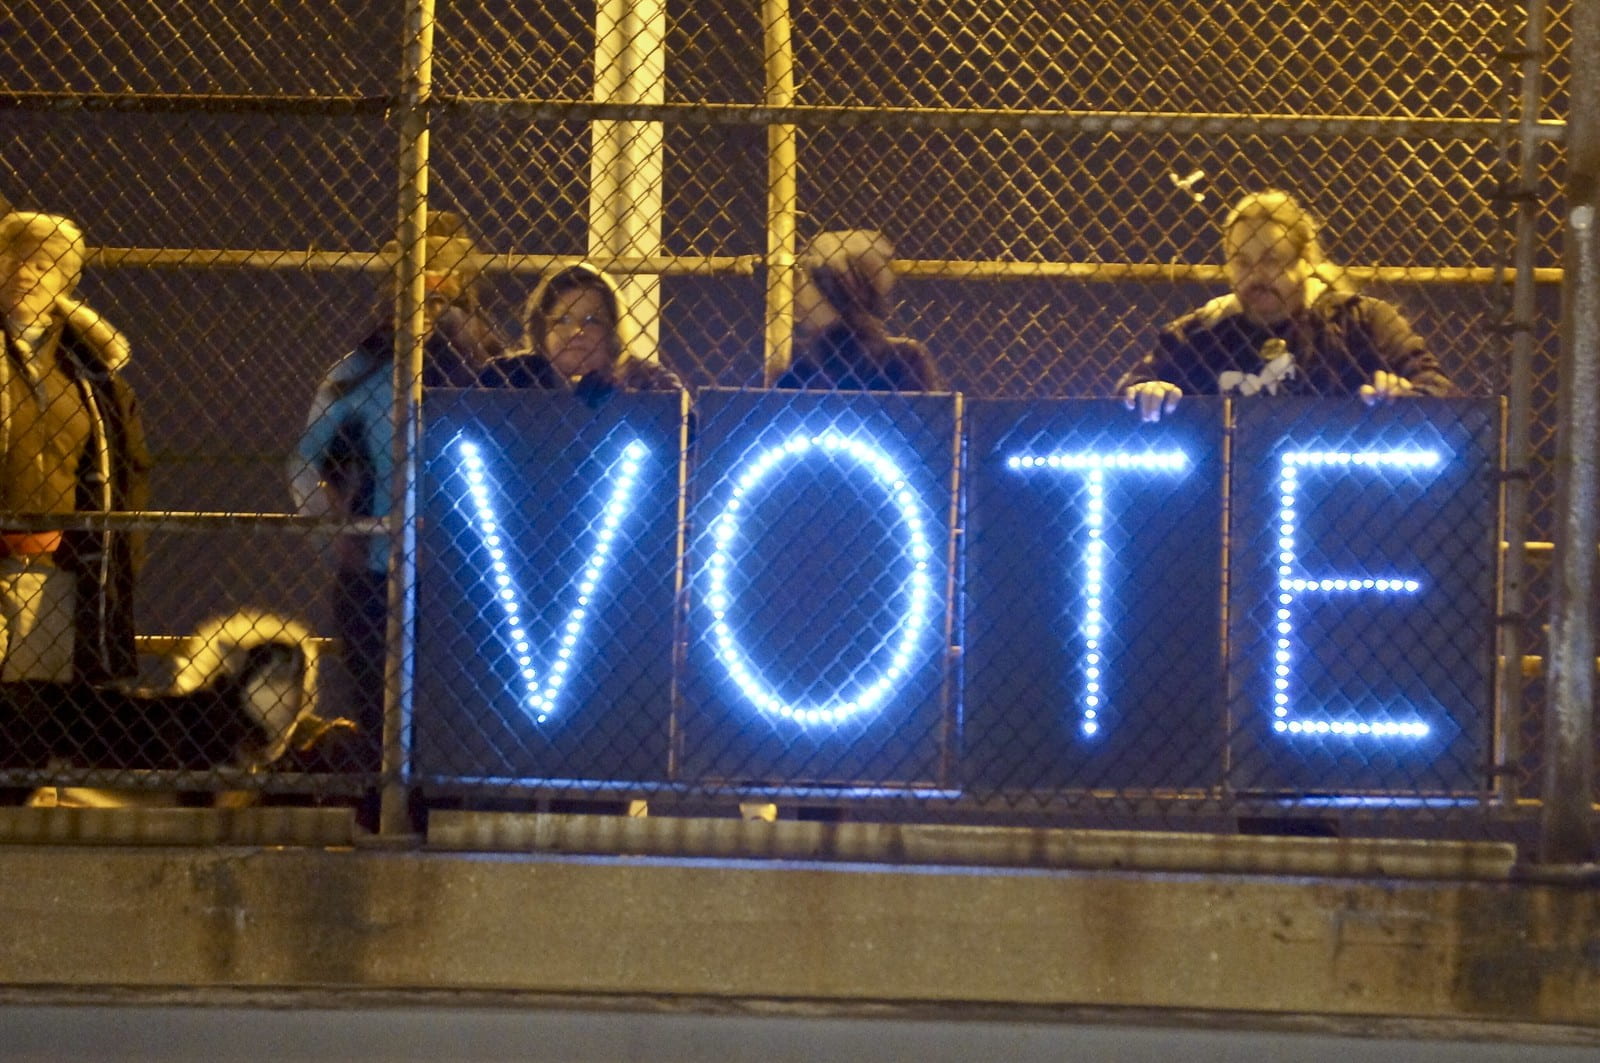 People holding up a sign that says "VOTE" in neon letters